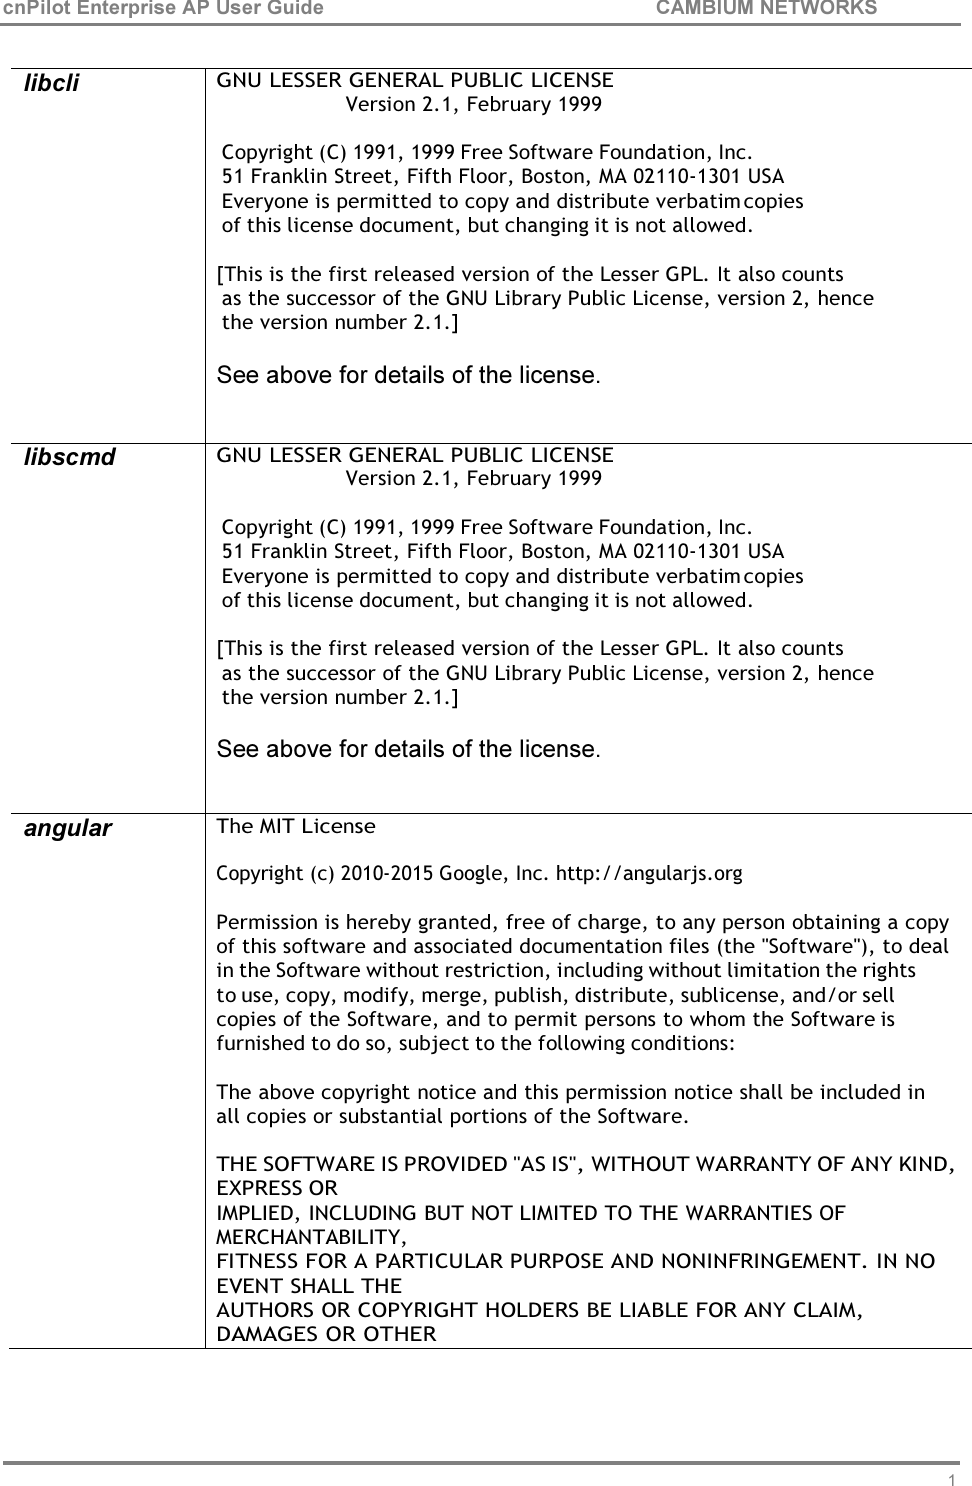 10cnPilot Enterprise AP User Guide CAMBIUM NETWORKS     libcli GNU LESSER GENERAL PUBLIC LICENSE Version 2.1, February 1999  Copyright (C) 1991, 1999 Free Software Foundation, Inc. 51 Franklin Street, Fifth Floor, Boston, MA 02110-1301 USA Everyone is permitted to copy and distribute verbatim copies of this license document, but changing it is not allowed.  [This is the first released version of the Lesser GPL. It also counts as the successor of the GNU Library Public License, version 2, hence the version number 2.1.]  See above for details of the license. libscmd GNU LESSER GENERAL PUBLIC LICENSE Version 2.1, February 1999  Copyright (C) 1991, 1999 Free Software Foundation, Inc. 51 Franklin Street, Fifth Floor, Boston, MA 02110-1301 USA Everyone is permitted to copy and distribute verbatim copies of this license document, but changing it is not allowed.  [This is the first released version of the Lesser GPL. It also counts as the successor of the GNU Library Public License, version 2, hence the version number 2.1.]  See above for details of the license. angular The MIT License  Copyright (c) 2010-2015 Google, Inc. http://angularjs.org  Permission is hereby granted, free of charge, to any person obtaining a copy of this software and associated documentation files (the &quot;Software&quot;), to deal in the Software without restriction, including without limitation the rights to use, copy, modify, merge, publish, distribute, sublicense, and/or sell copies of the Software, and to permit persons to whom the Software is furnished to do so, subject to the following conditions:  The above copyright notice and this permission notice shall be included in all copies or substantial portions of the Software.  THE SOFTWARE IS PROVIDED &quot;AS IS&quot;, WITHOUT WARRANTY OF ANY KIND, EXPRESS OR IMPLIED, INCLUDING BUT NOT LIMITED TO THE WARRANTIES OF MERCHANTABILITY, FITNESS FOR A PARTICULAR PURPOSE AND NONINFRINGEMENT. IN NO EVENT SHALL THE AUTHORS OR COPYRIGHT HOLDERS BE LIABLE FOR ANY CLAIM, DAMAGES OR OTHER 